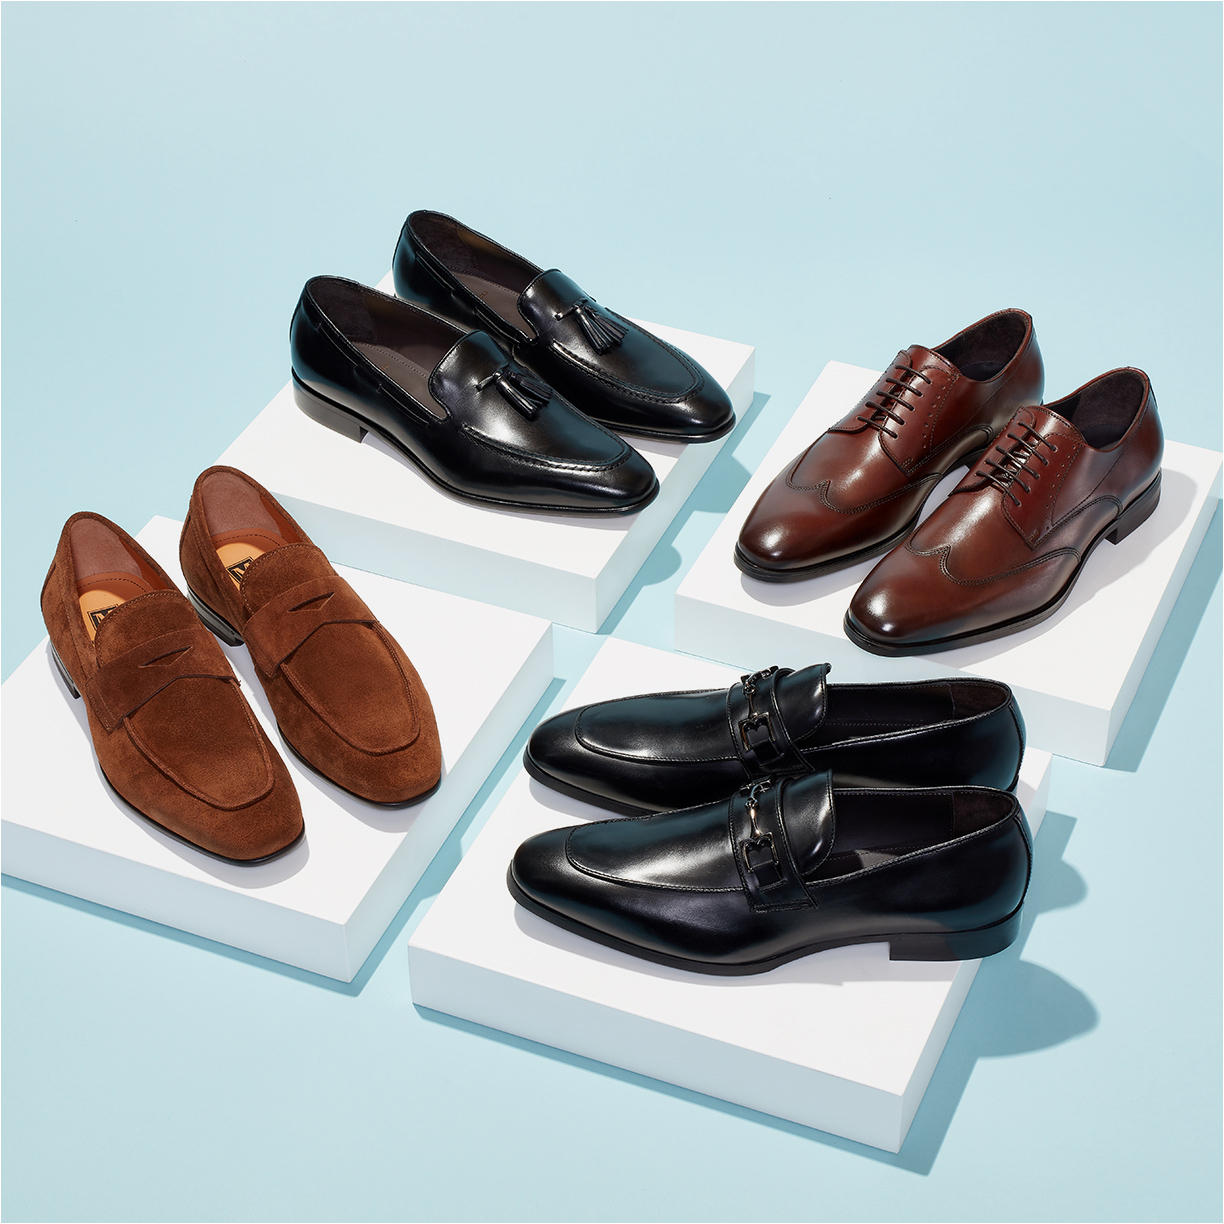 Bruno Magli Men's Shoes Up to 50% Off